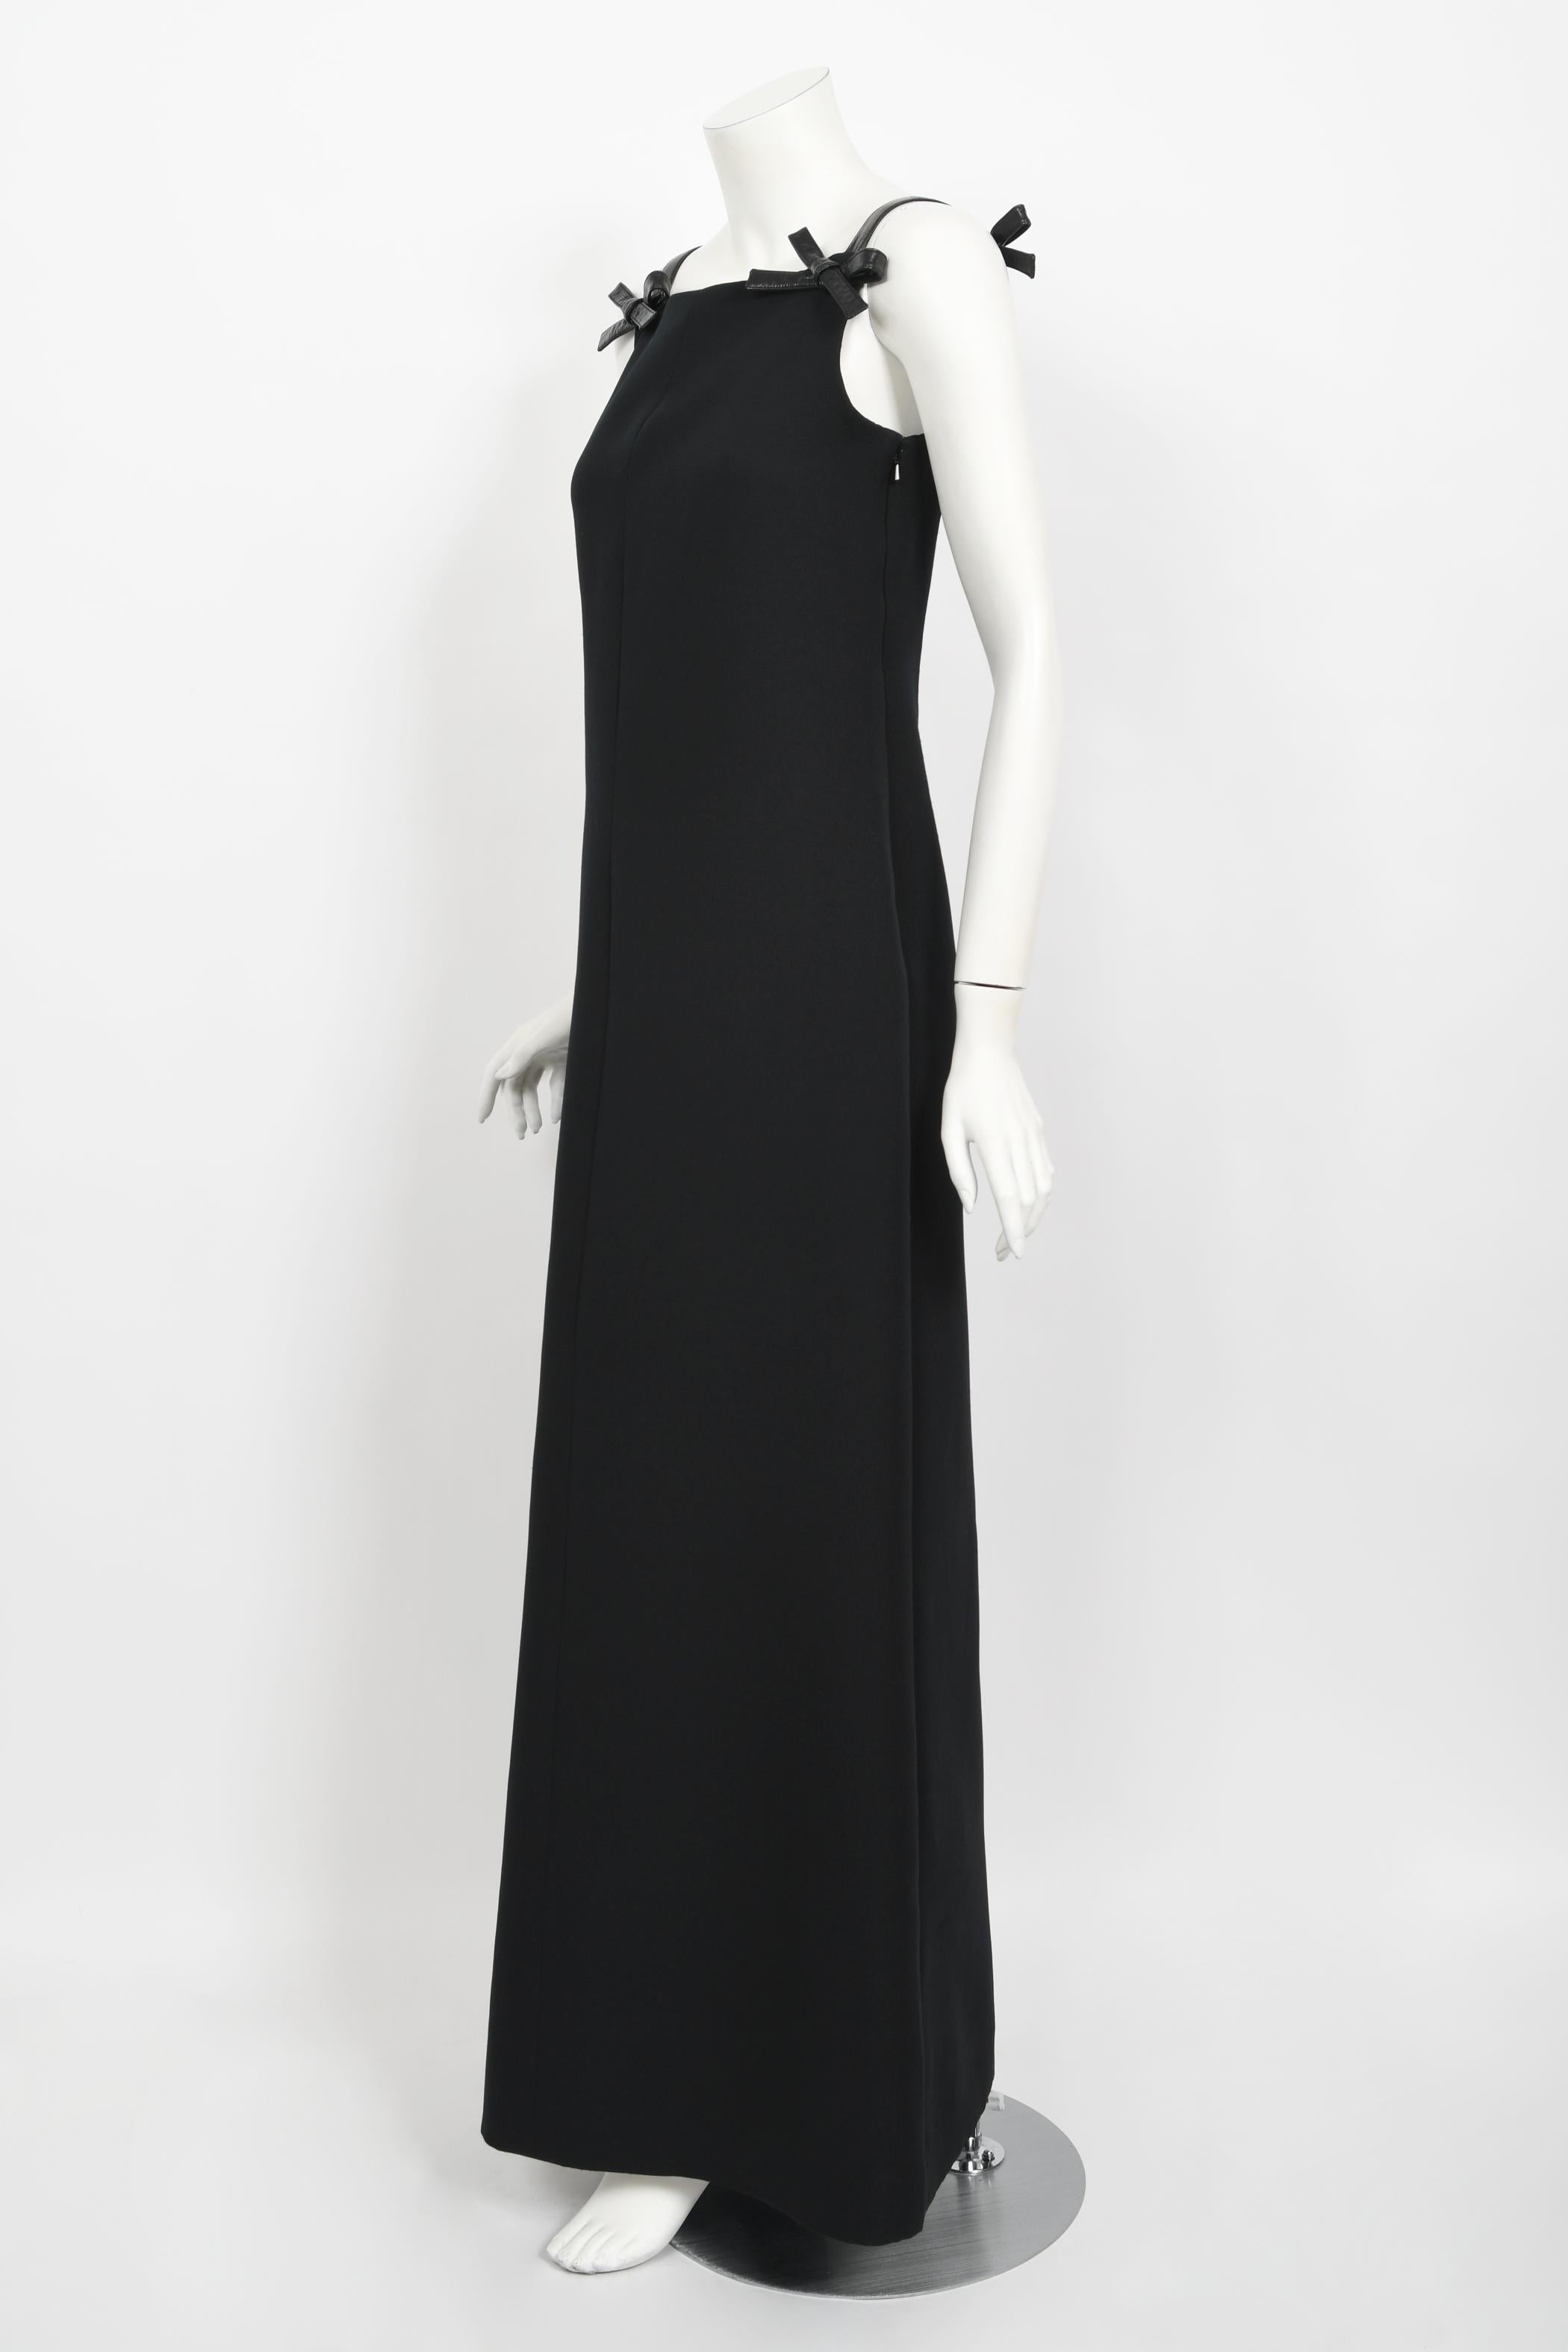 Vintage 1960's André Courrèges Black Vinyl-Bows Minimalist Space-Age Mod Gown In Good Condition For Sale In Beverly Hills, CA